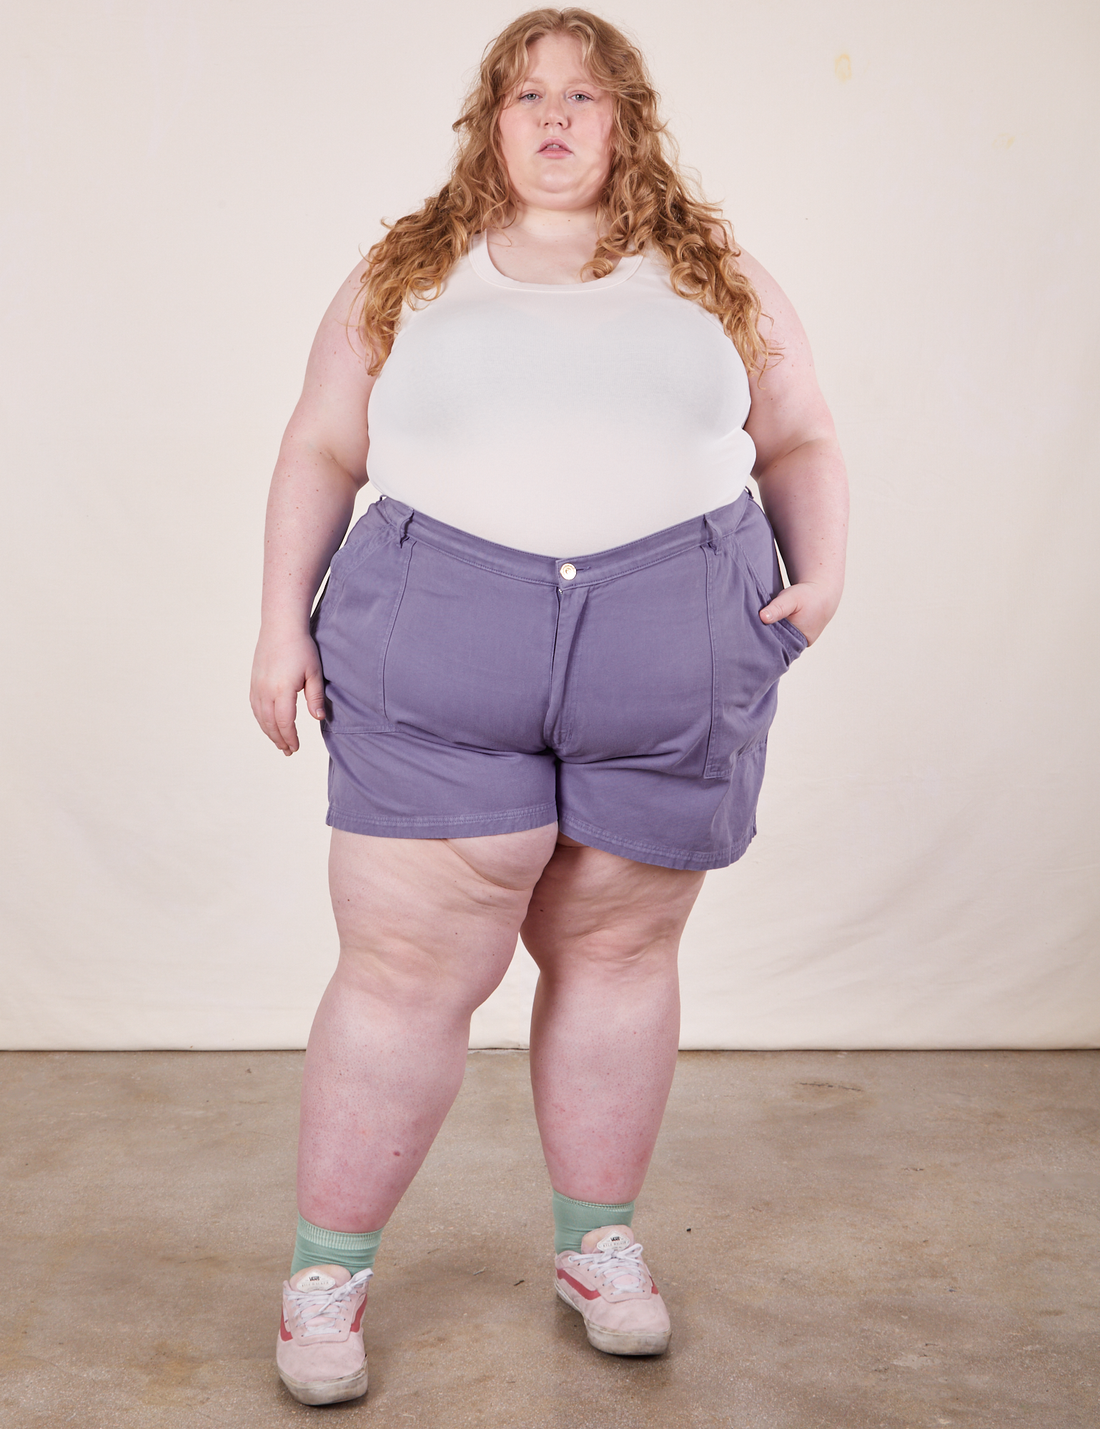 Catie is 5'11" and wearing size 5XL Classic Work Shorts in Faded Grape paired with a vintage off-white Tank Top